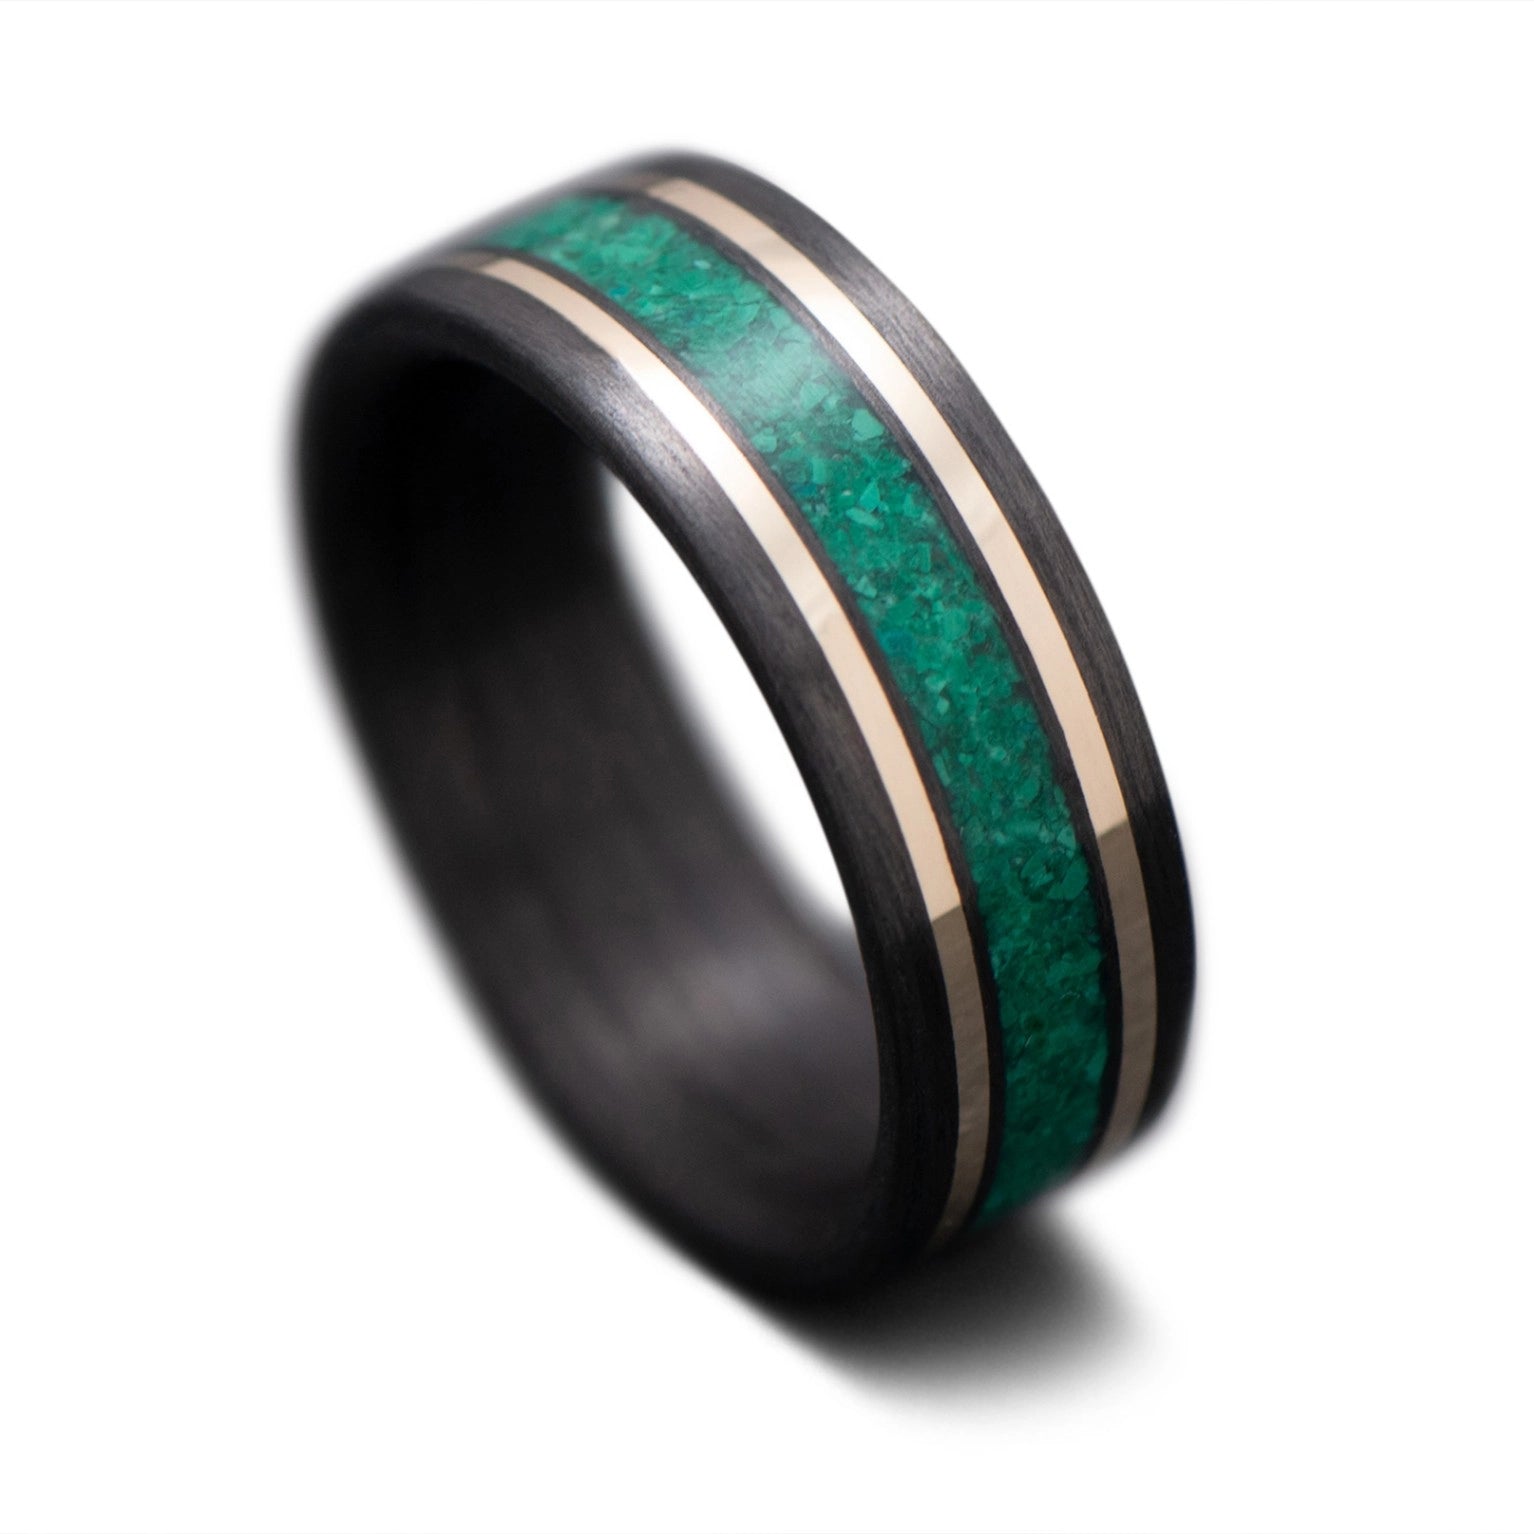 CarbonUni Core Ring with Yellow Gold and Malachite inlay, 7mm -THE MATRIX